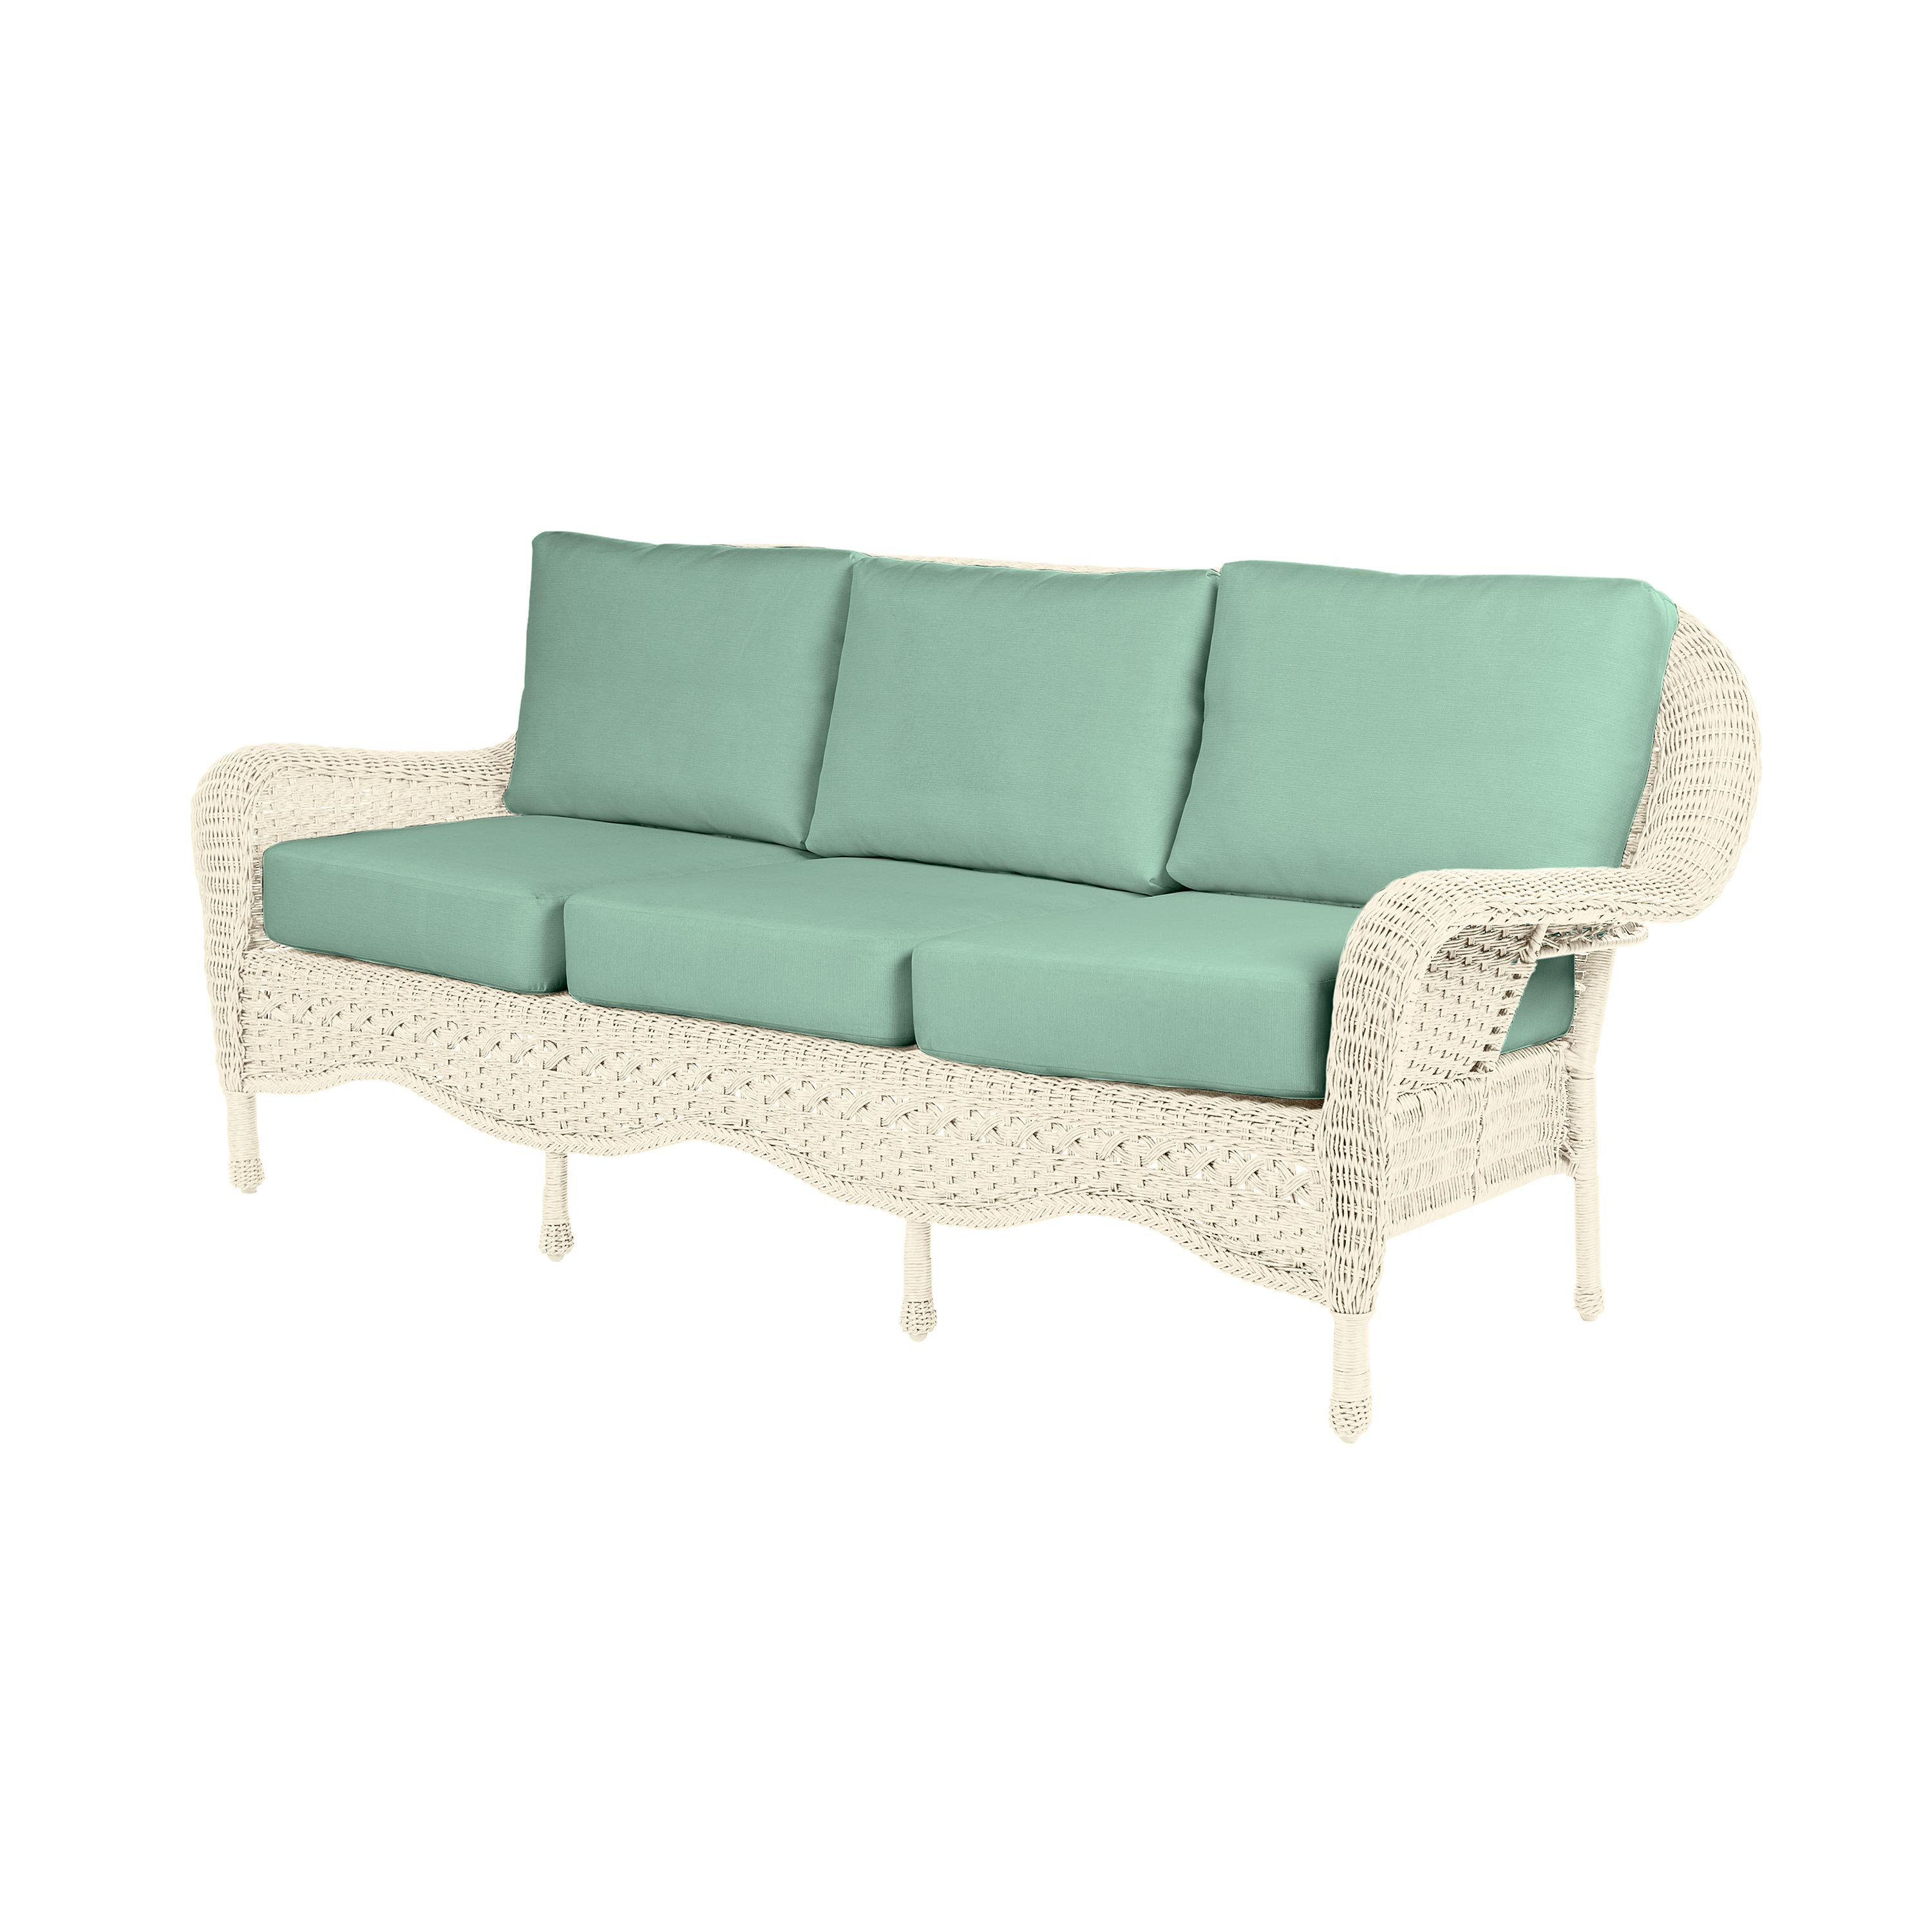 Prospect Hill Outdoor Wicker Deep Seating Sofa with Cushions swatch image